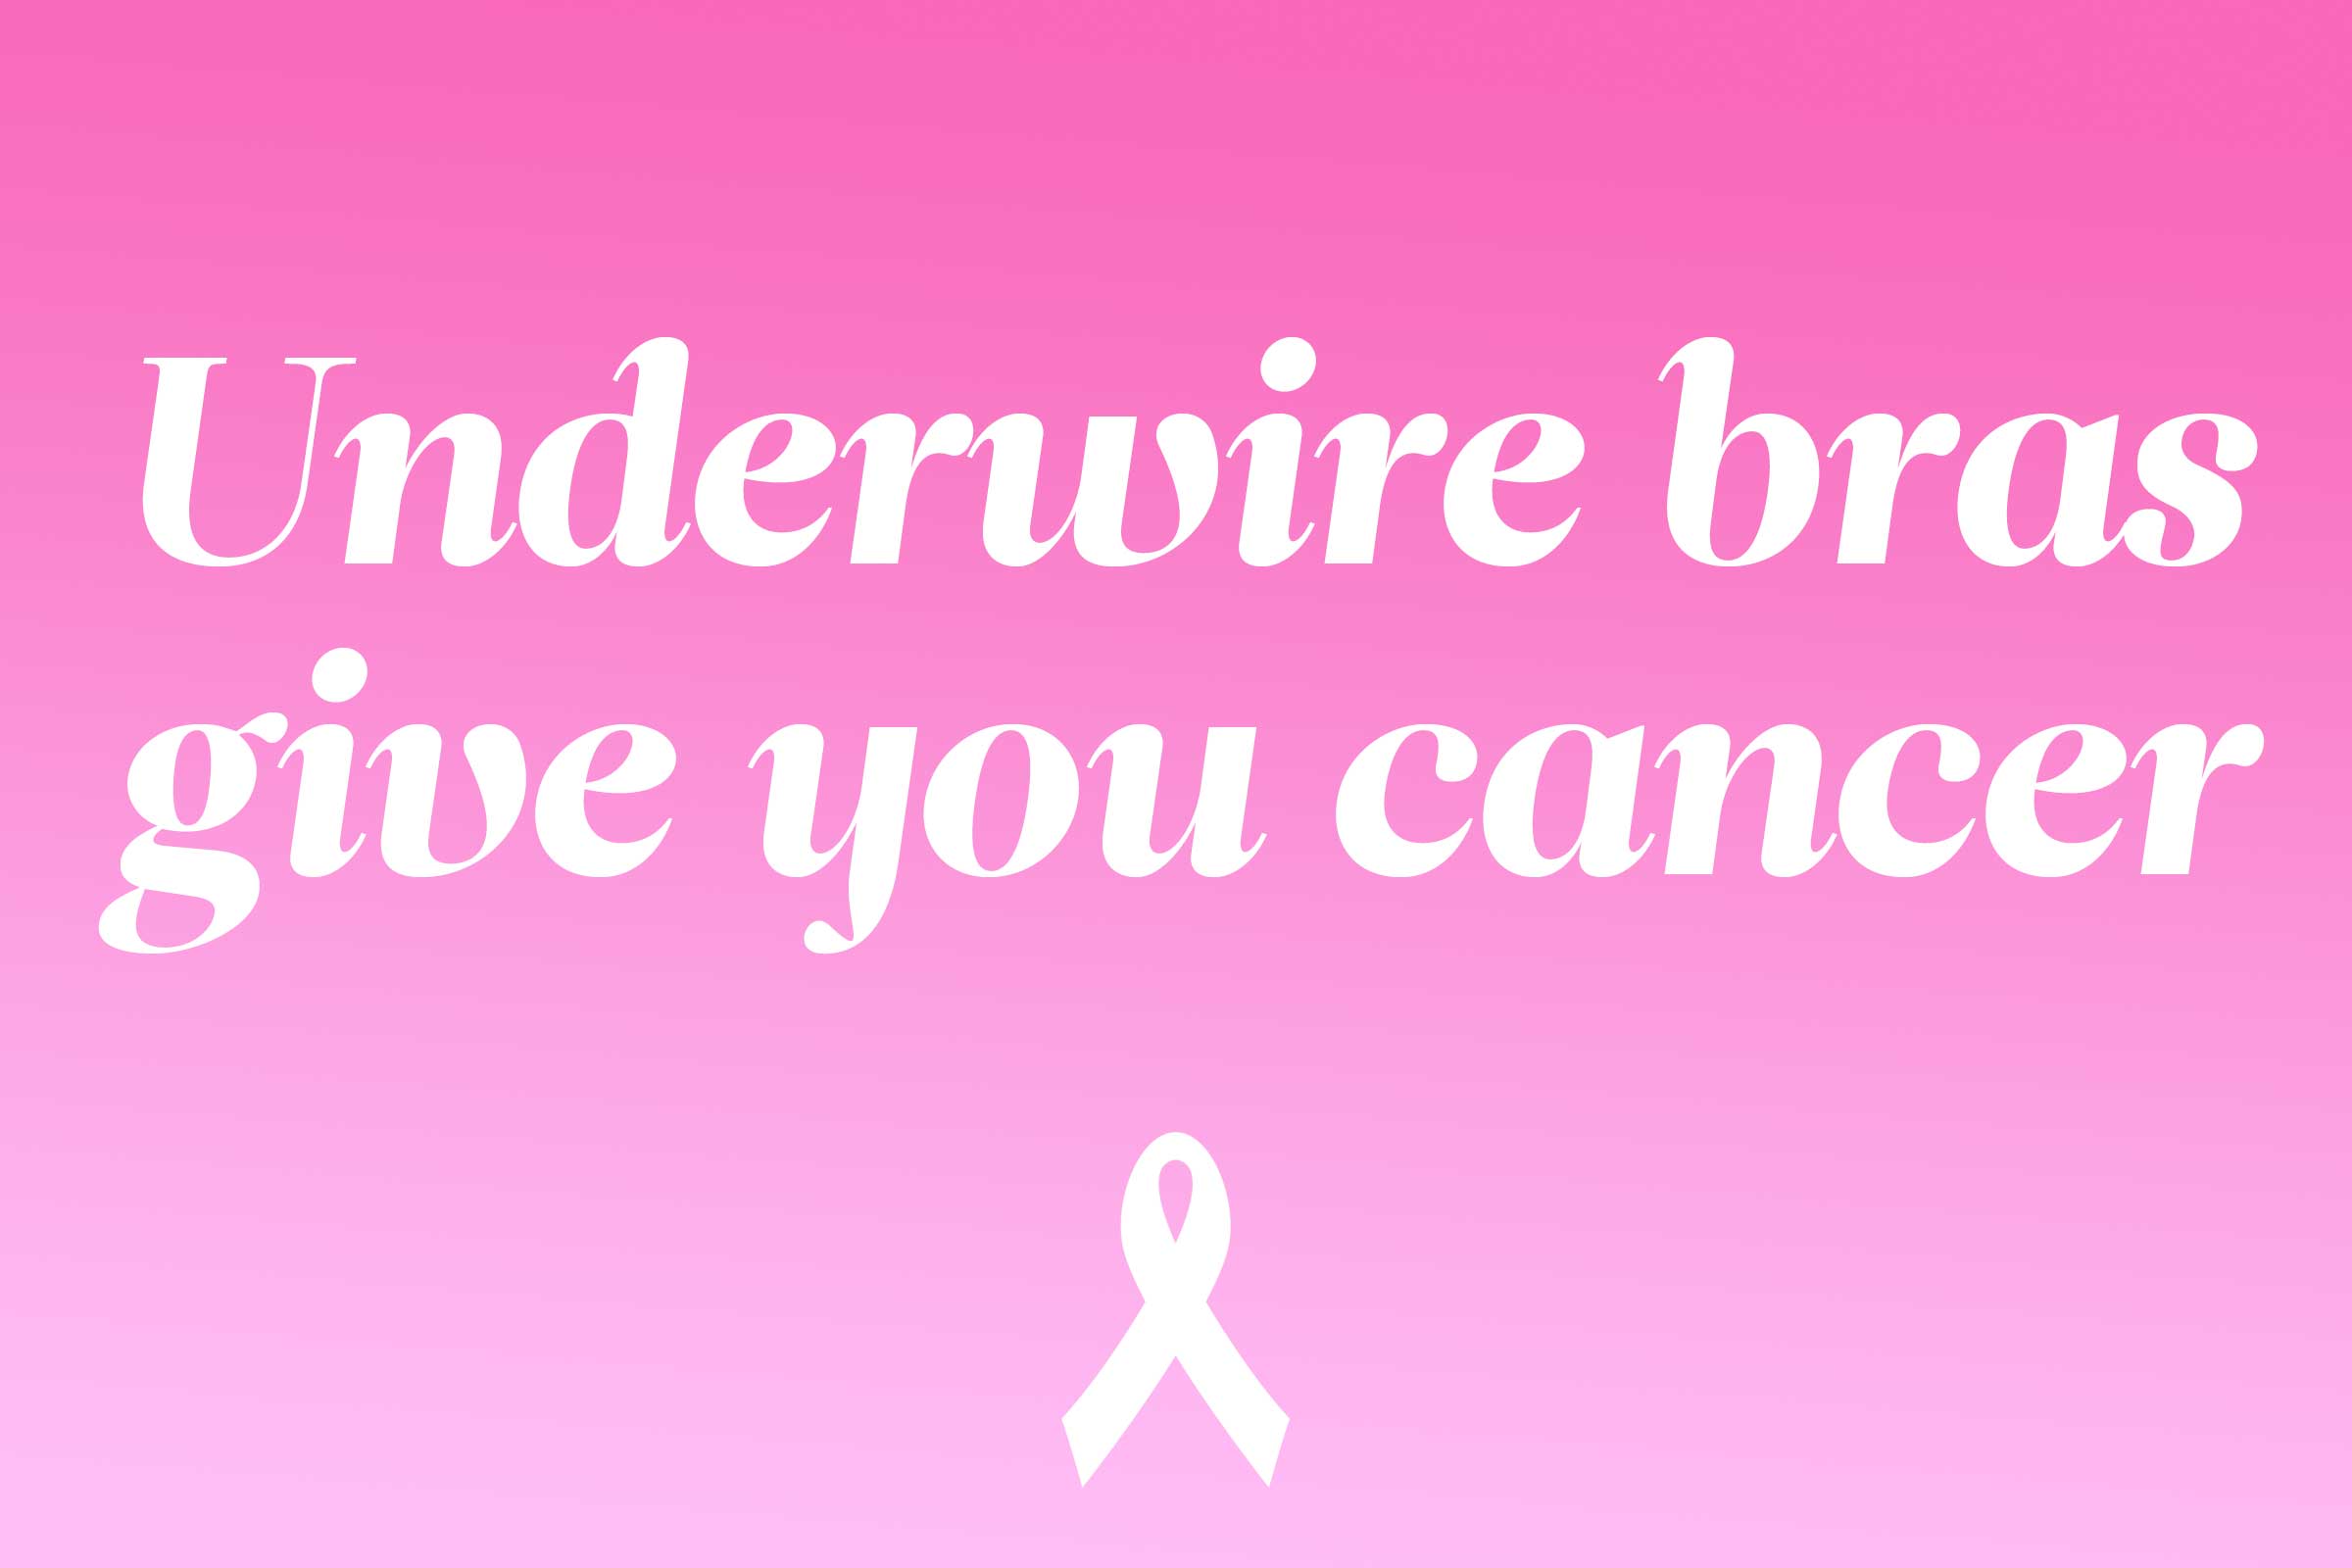 myth: underwire bras give you cancer